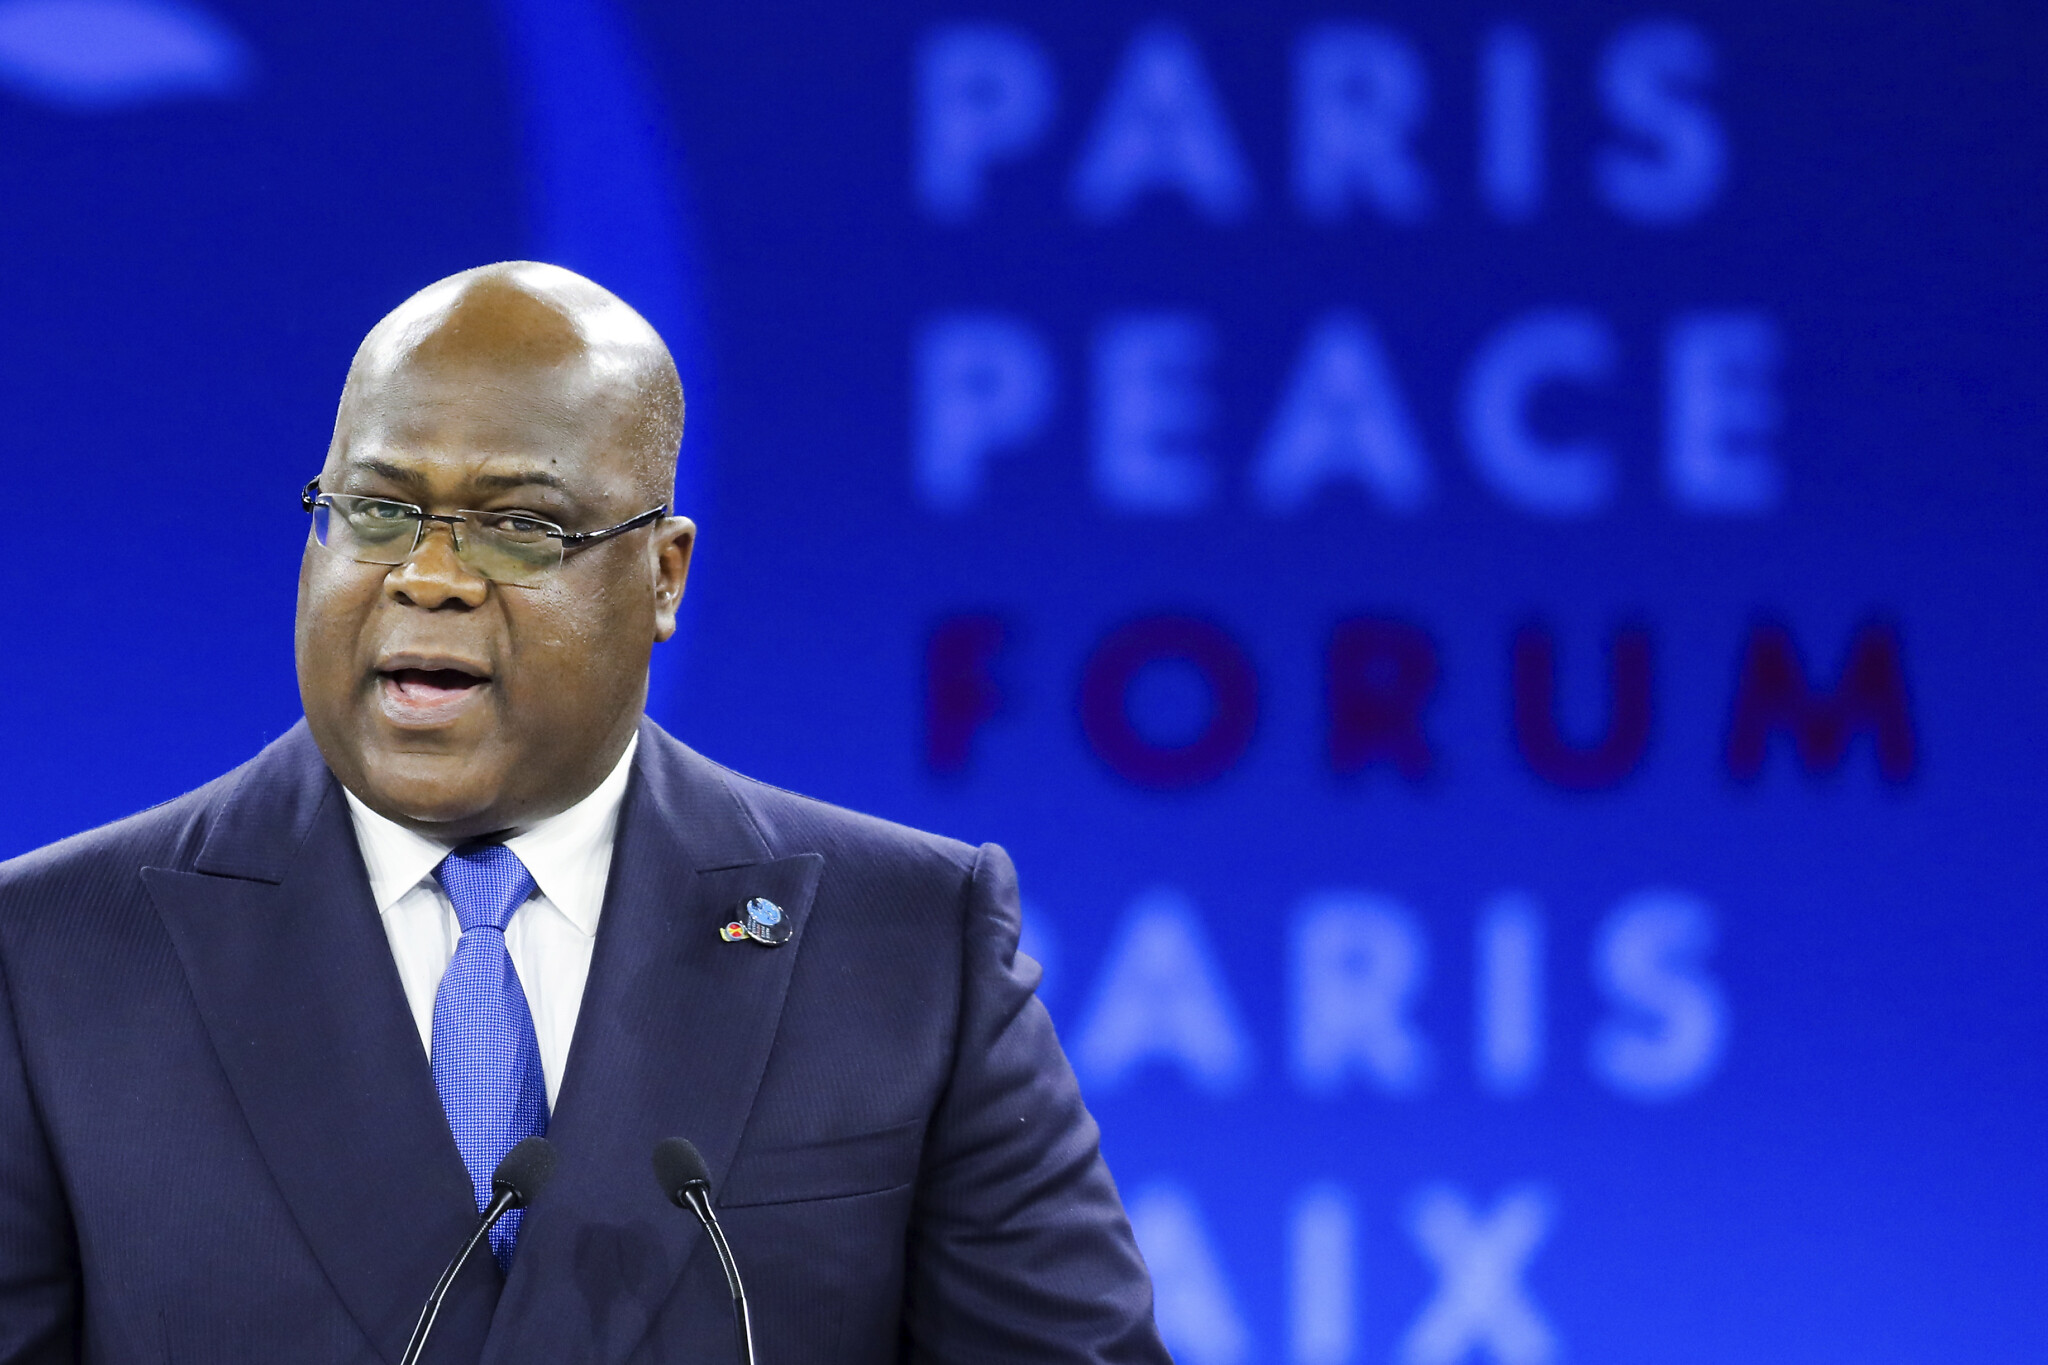 Congolese President Félix Tshisekedi underscored that he would not allow any Rwandan soldiers to form part of a regional security force to be deployed to eastern DRC.